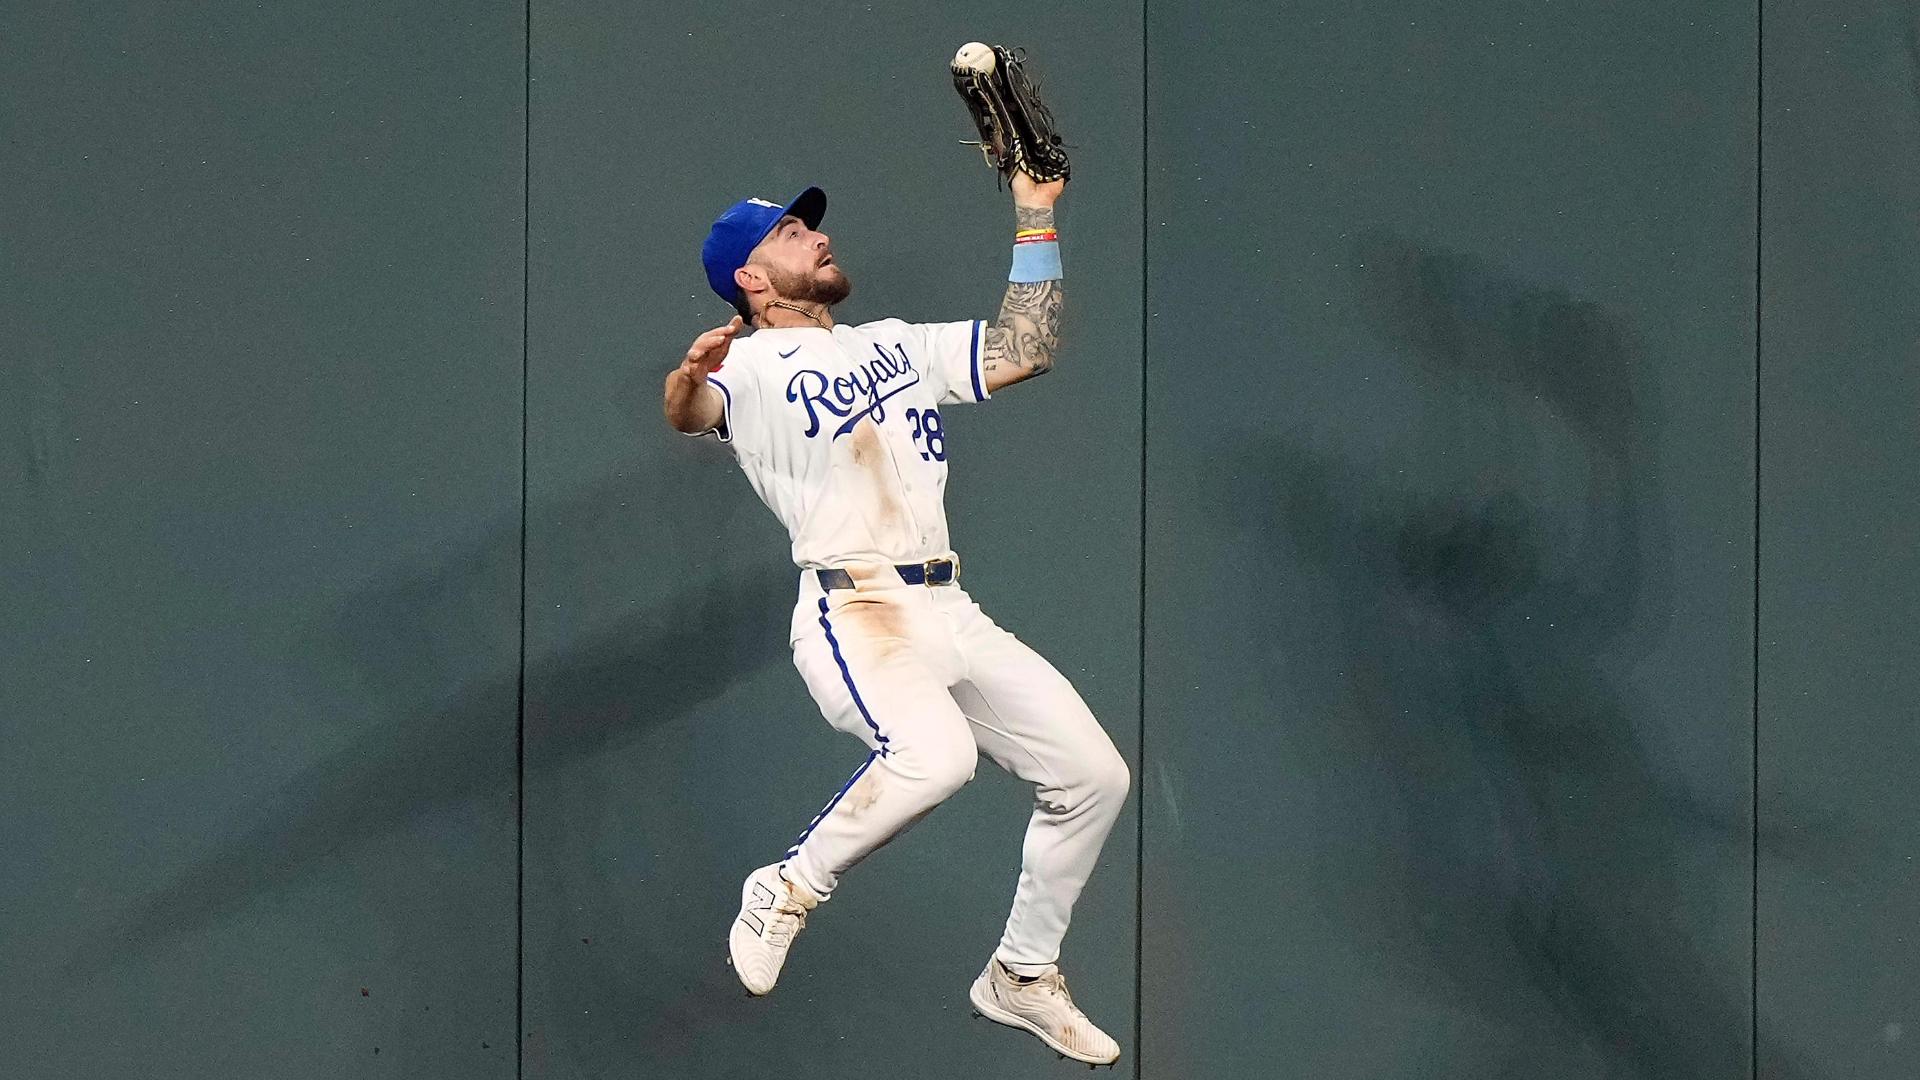 Kyle Isbel leaps into the wall to make a tremendous catch for the Royals